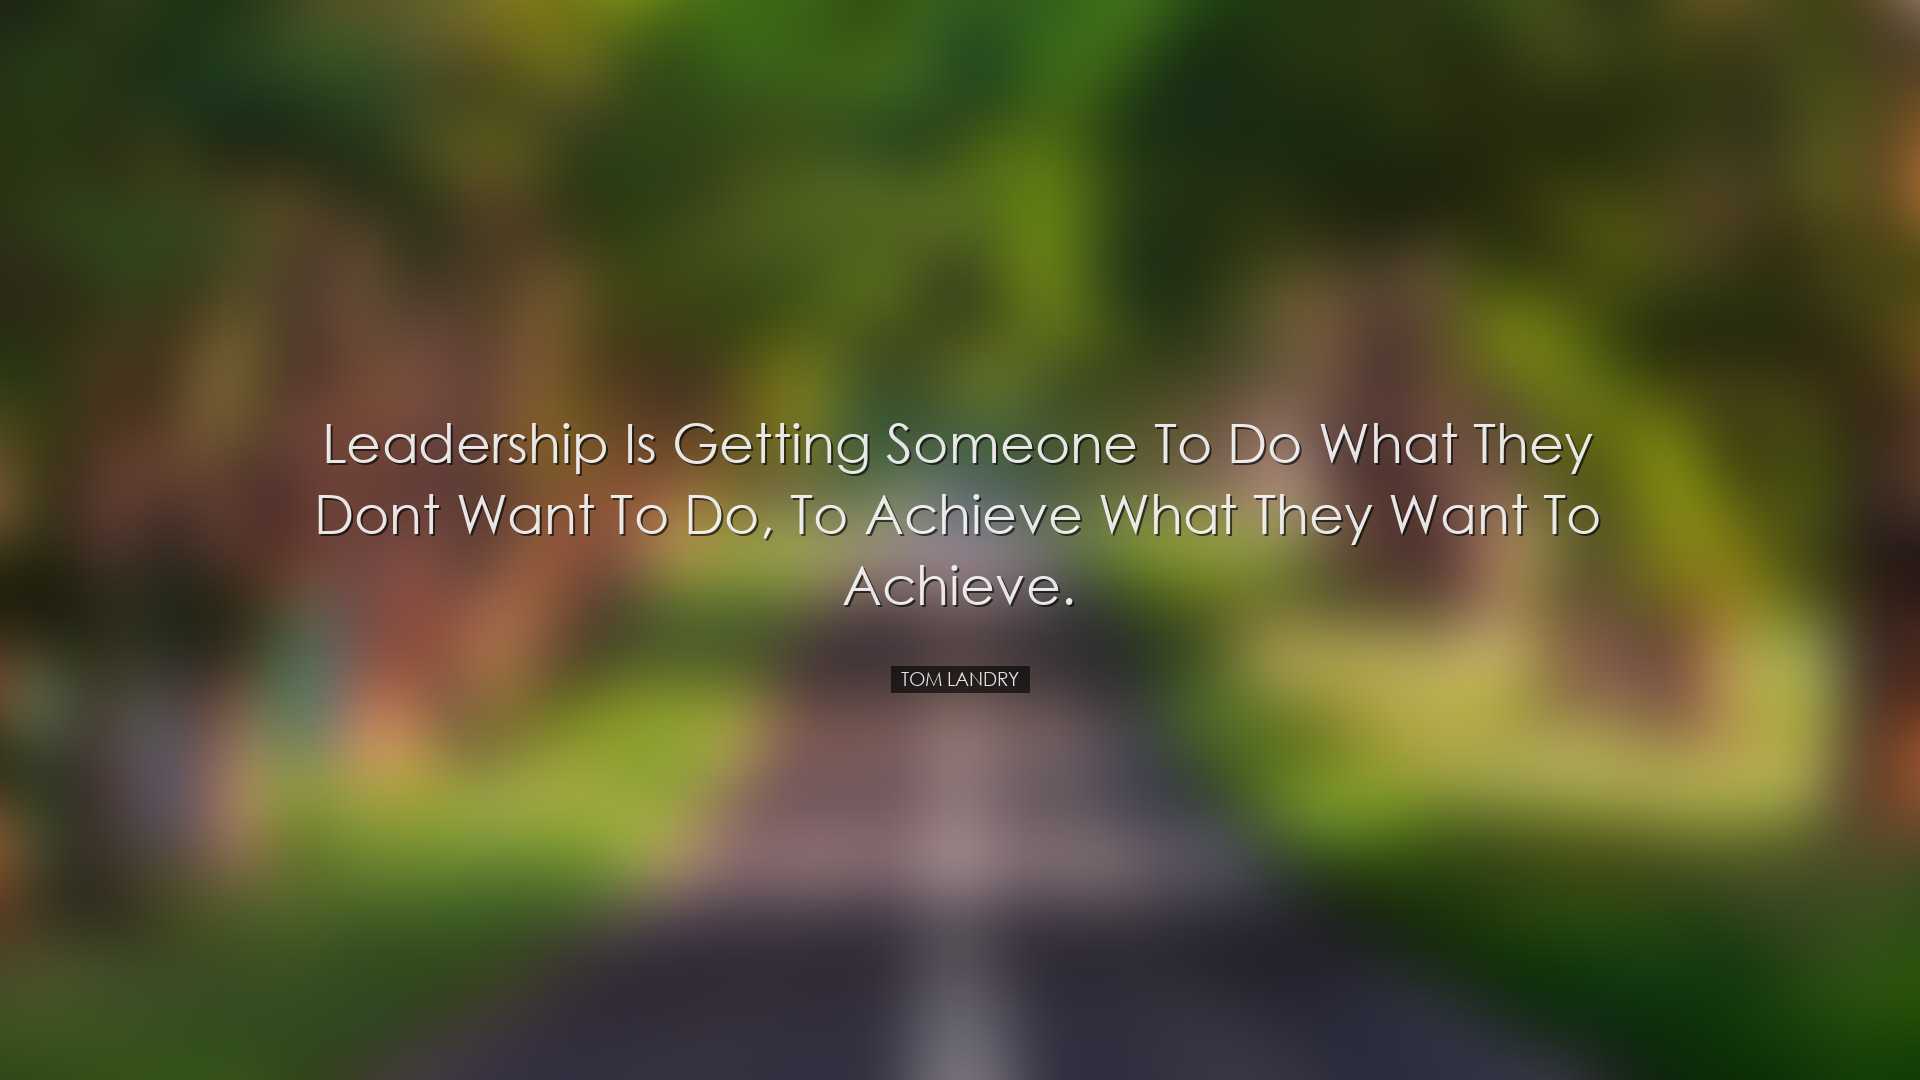 Leadership is getting someone to do what they dont want to do, to